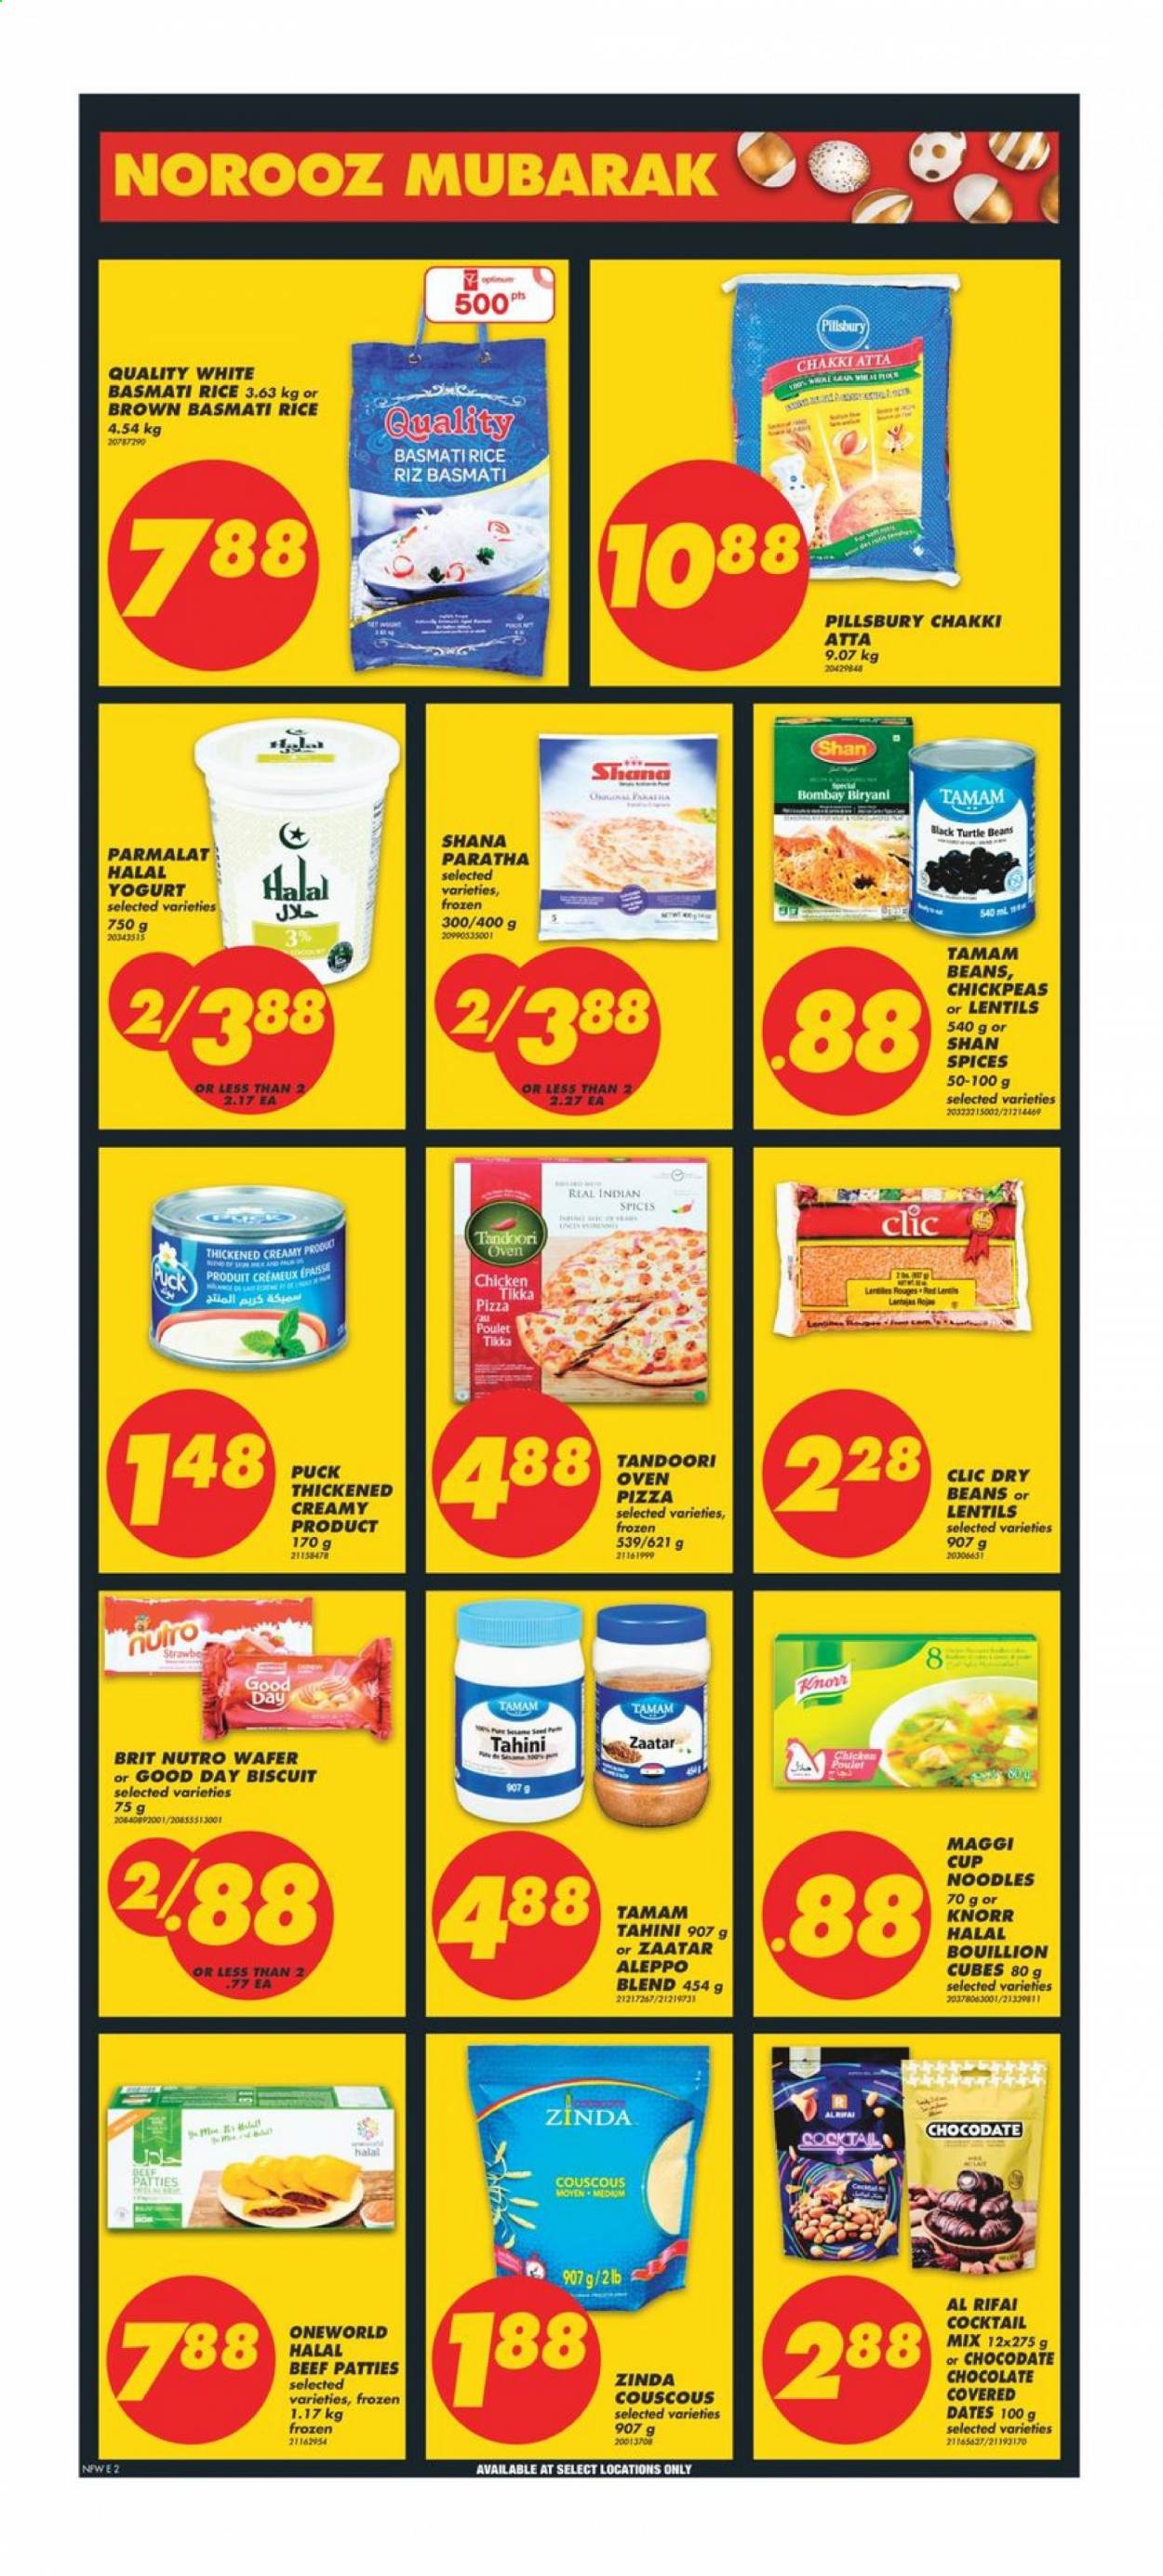 thumbnail - No Frills Flyer - March 12, 2021 - March 18, 2021 - Sales products - flatbread, indian bread, beans, pizza, Maggi Cup, Pillsbury, noodles cup, noodles, burger patties, Puck, yoghurt, Parmalat, wafers, biscuit, flour, sesame seed, lentils, basmati rice, rice, chickpeas, dry beans, tahini, cocktail, chicken, Maggi, couscous, Knorr. Page 2.